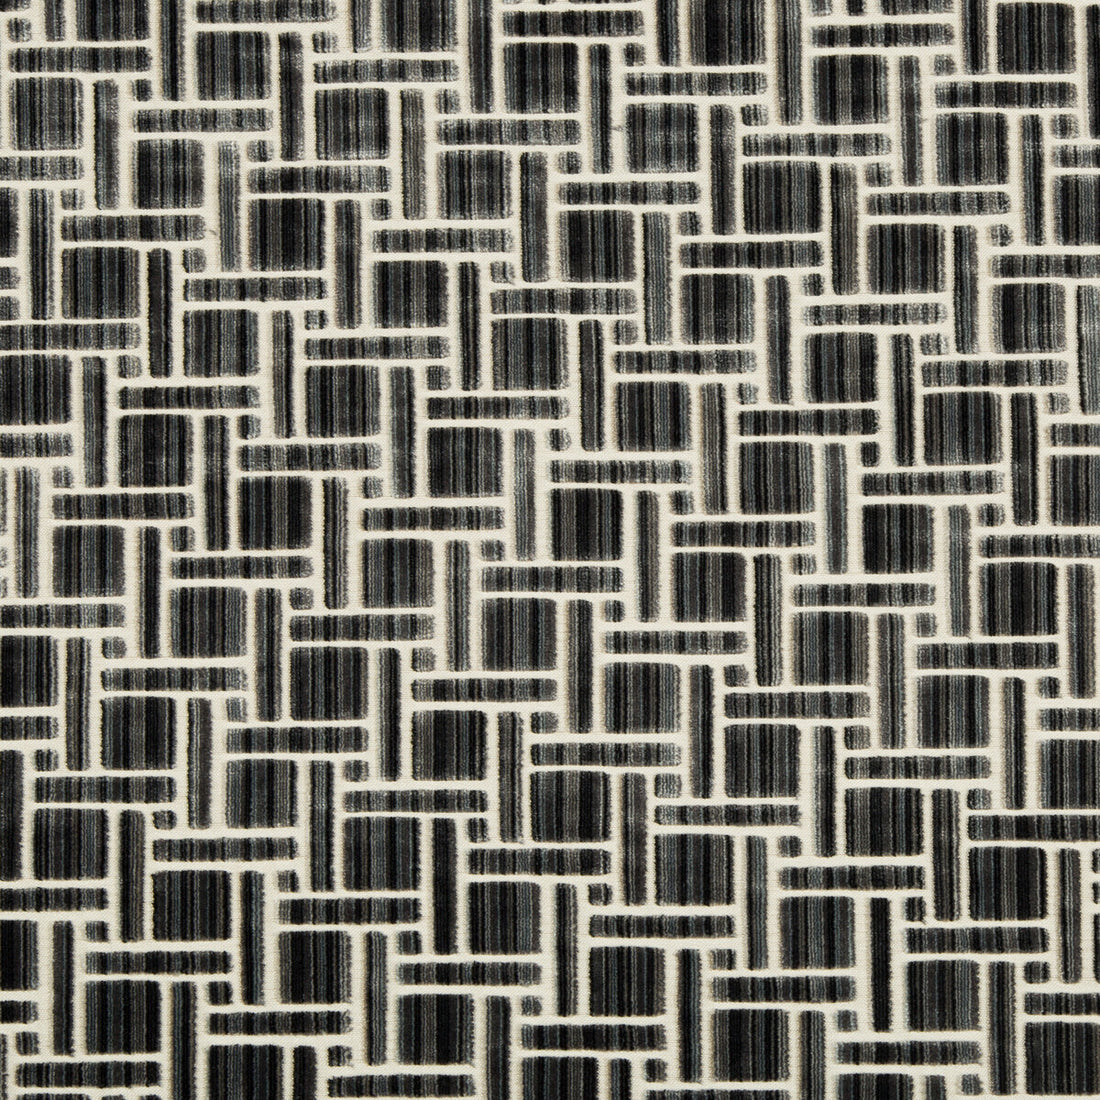 Inside Tracks fabric in anthracite color - pattern 34792.21.0 - by Kravet Couture in the Artisan Velvets collection